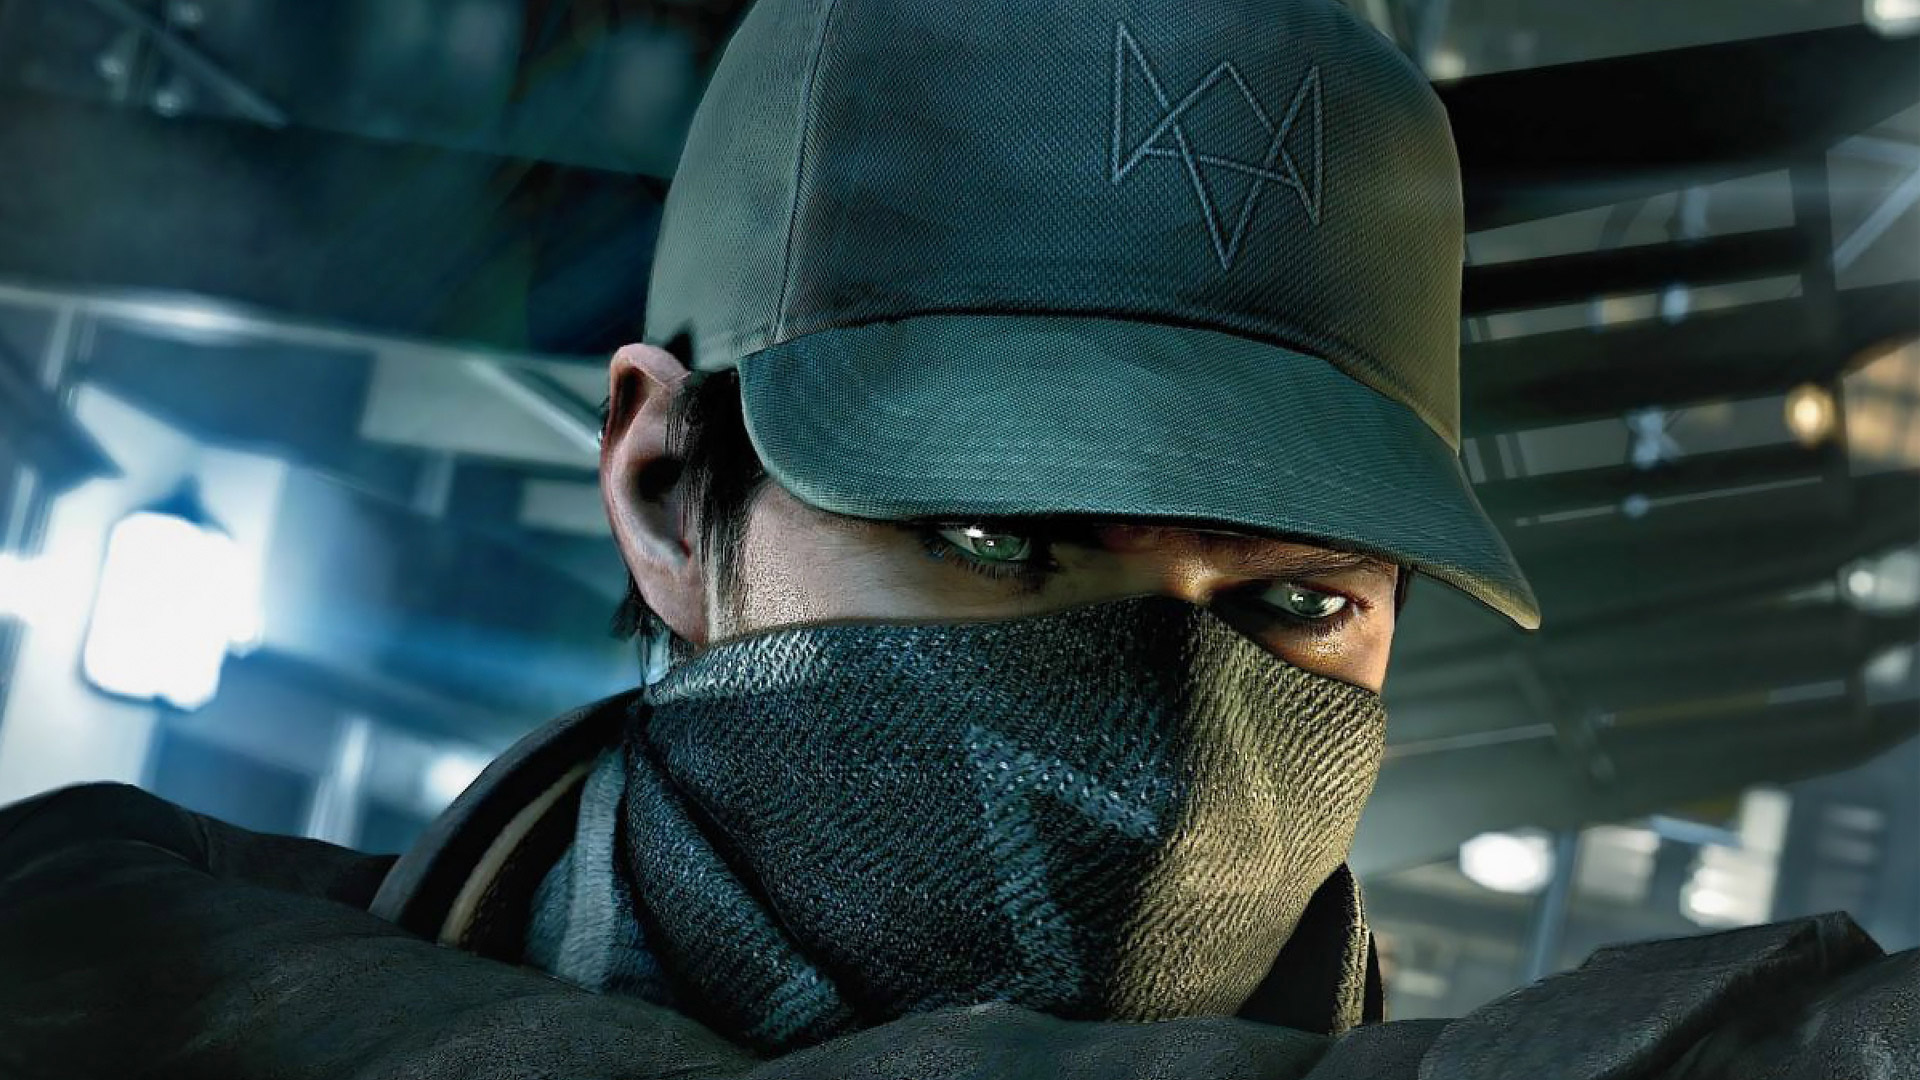 140+ Watch Dogs HD Wallpapers and Backgrounds